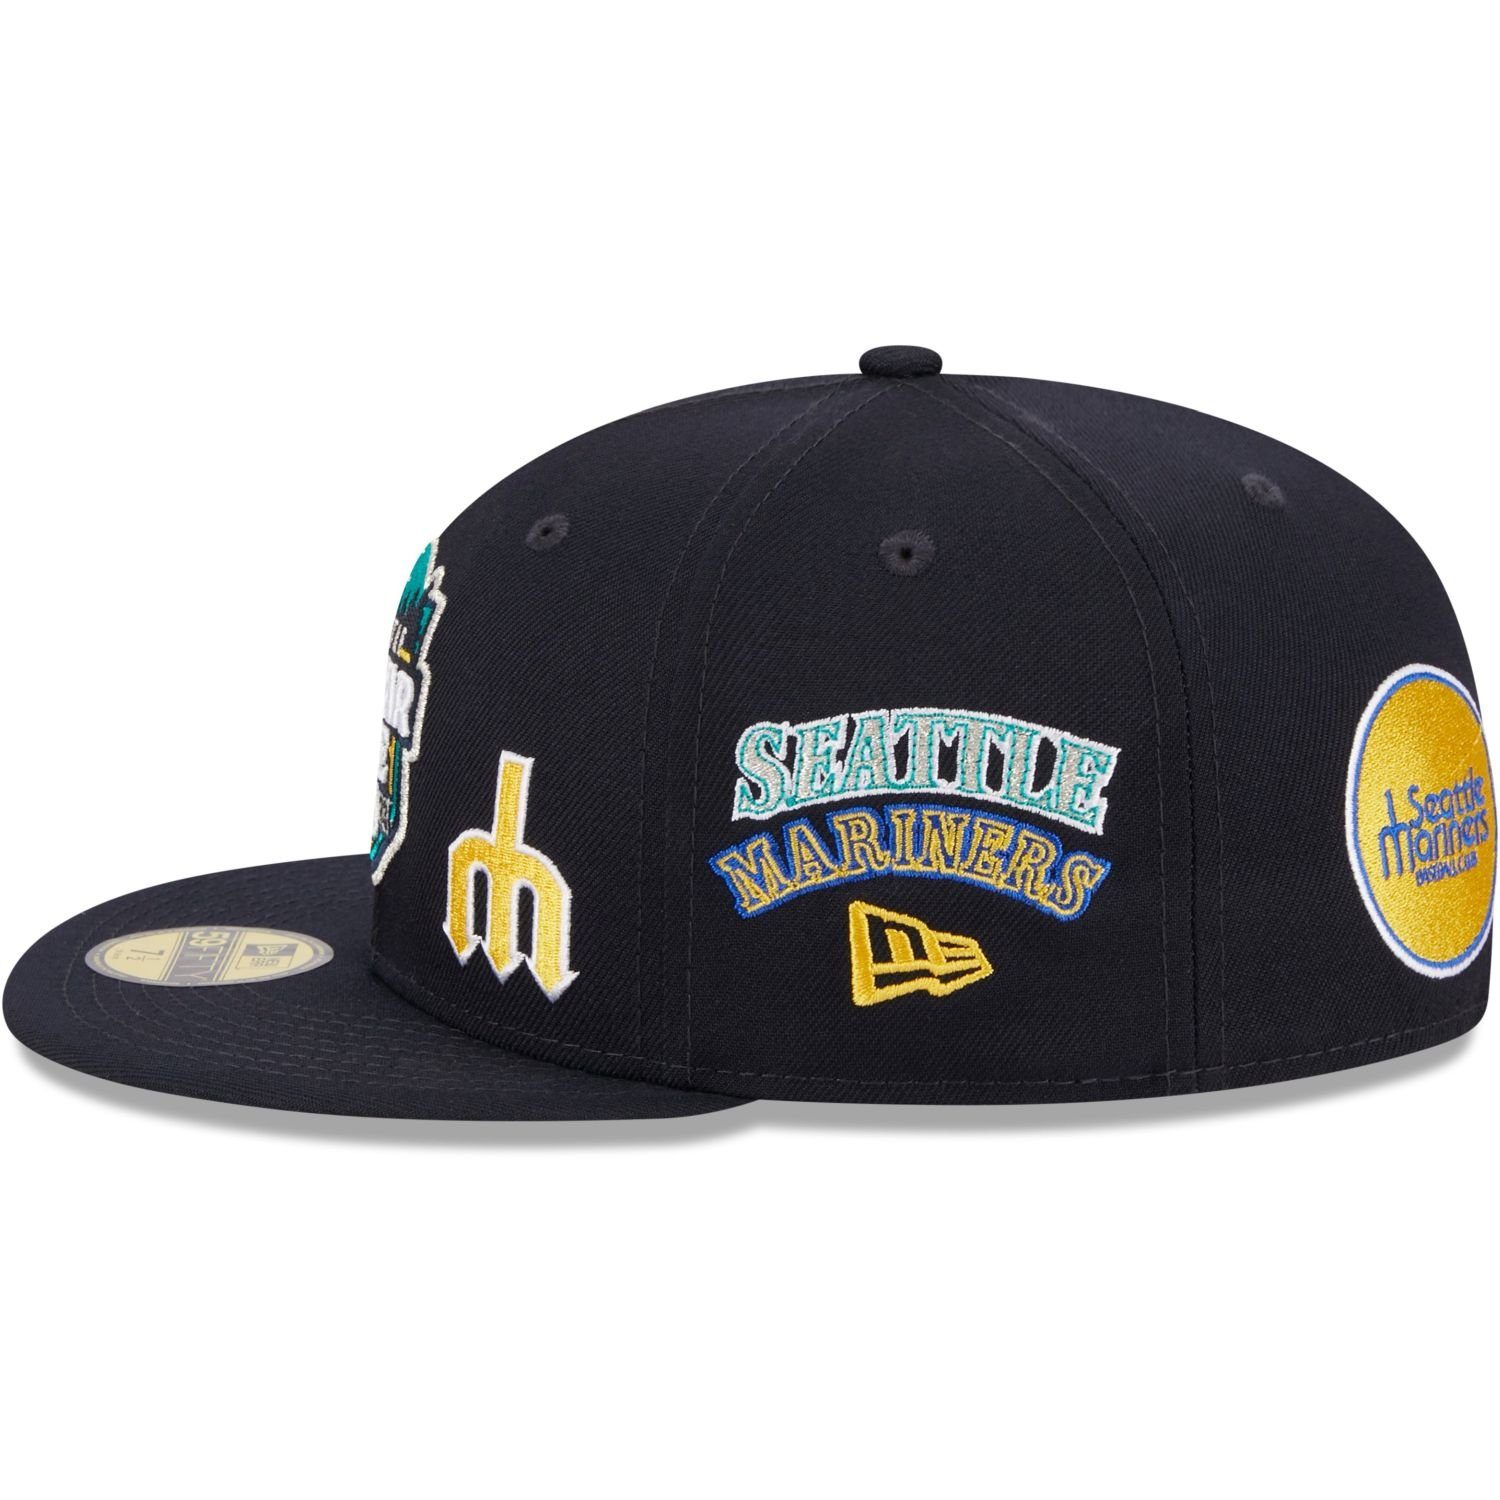 2023 Fitted 59Fifty Mariners Seattle ALLSTAR New Era Cap GAME